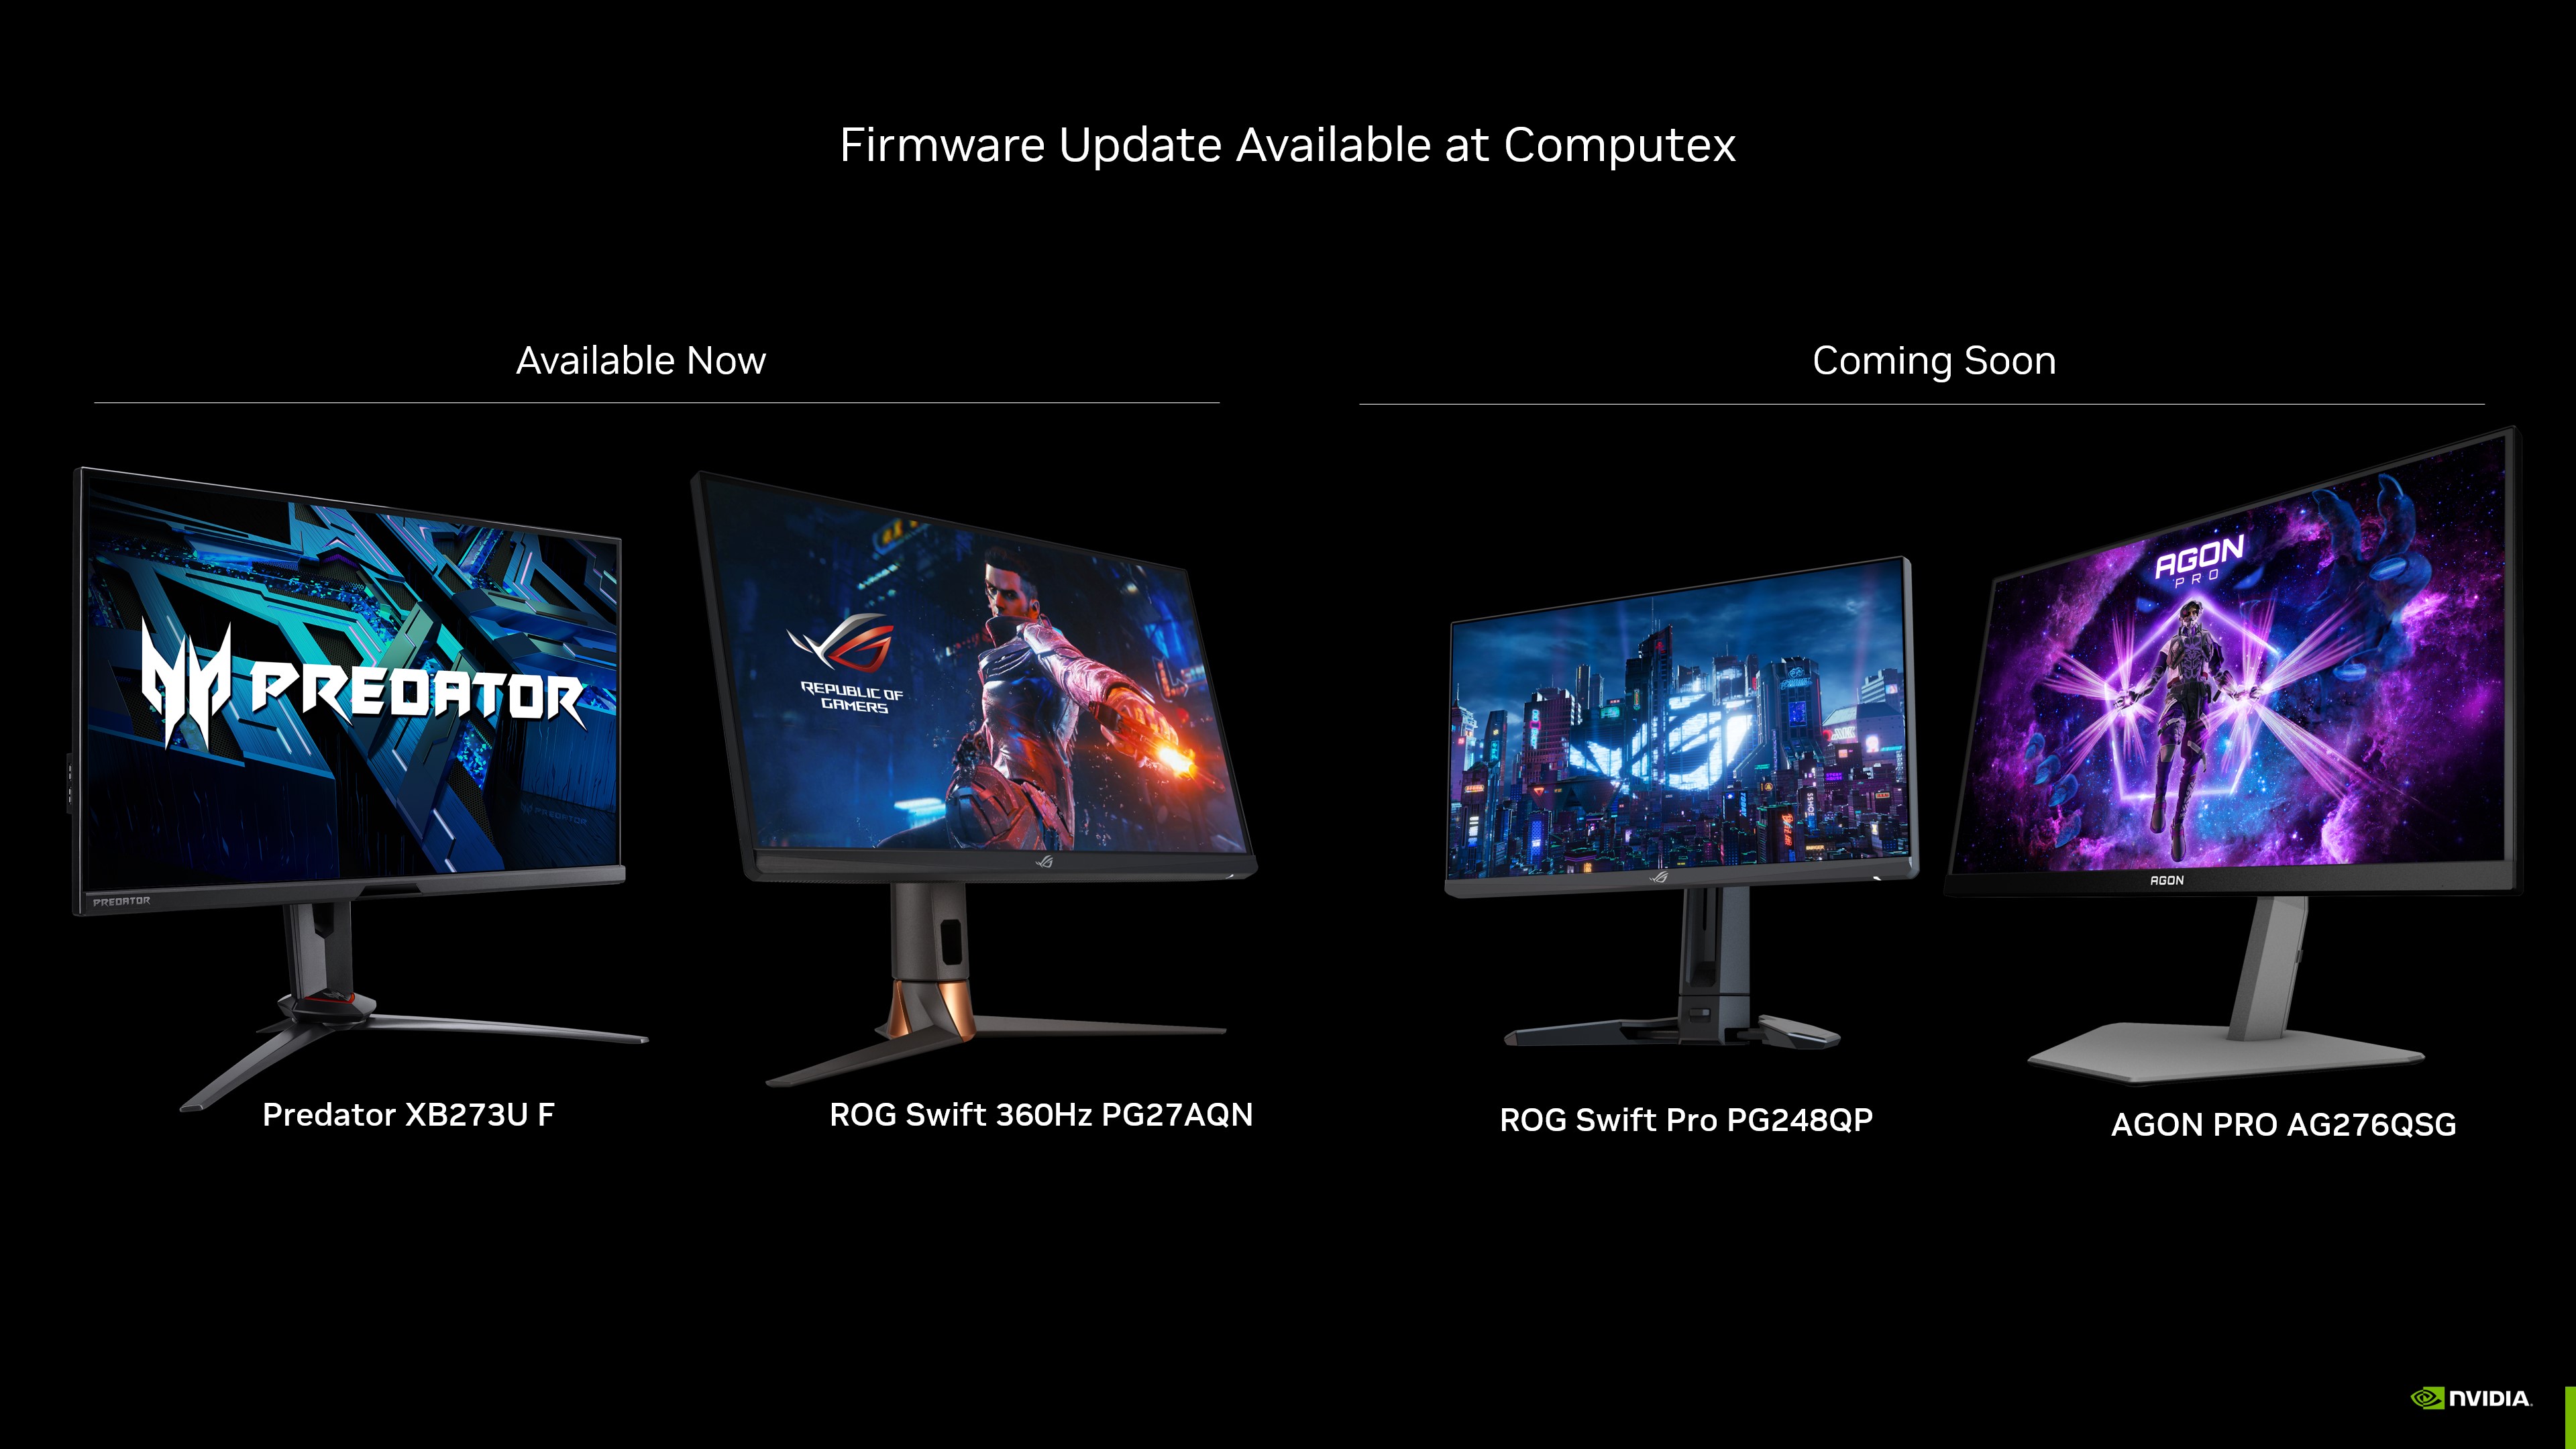 https://www.nvidia.com/content/dam/en-zz/Solutions/geforce/news/g-sync-ultra-low-motion-blur-2/nvidia-g-sync-ulmb2-displays-available-now-coming-soon.jpg